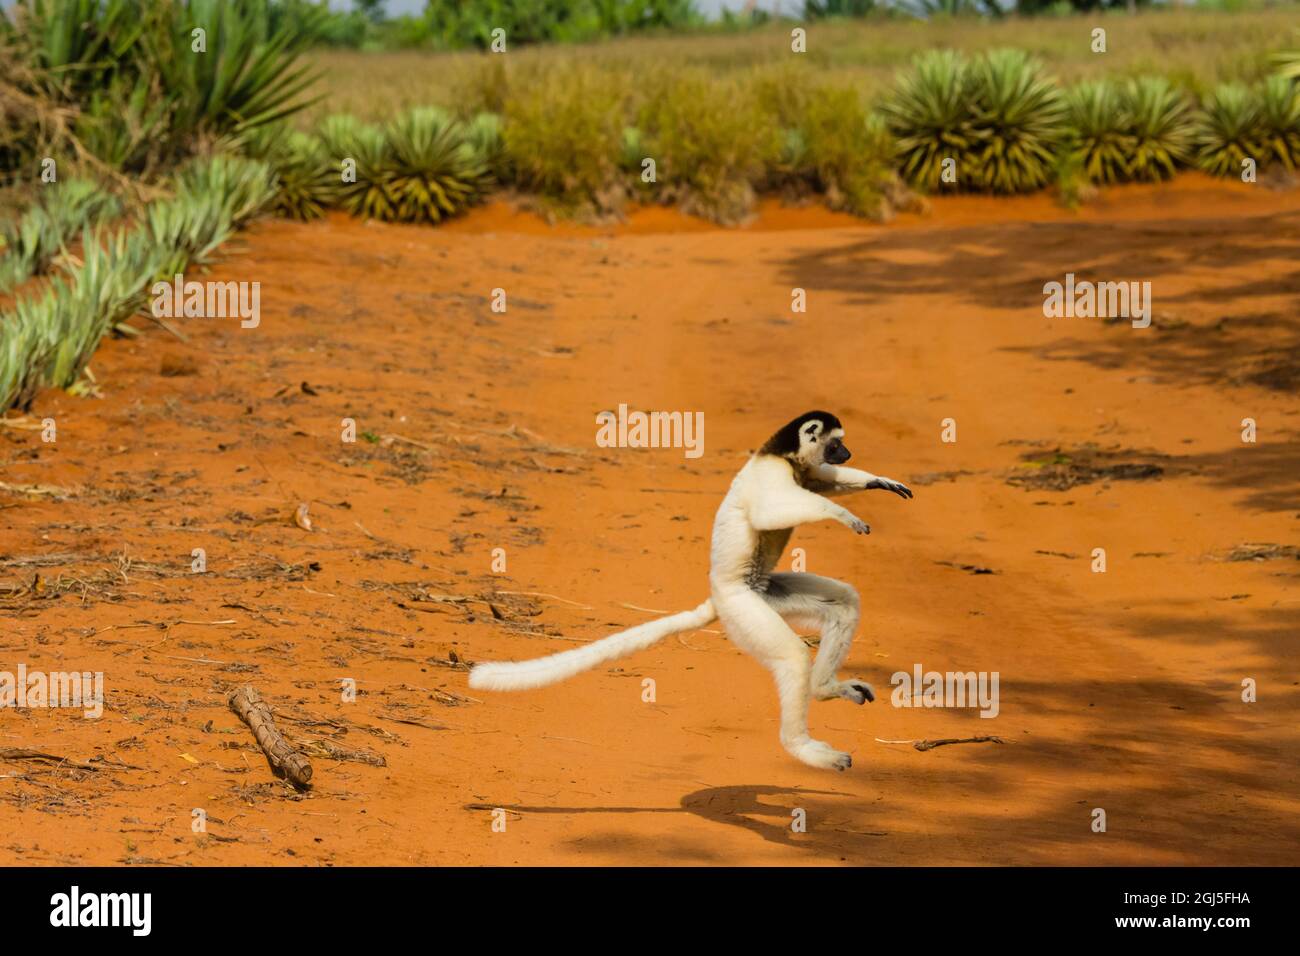 Madagascar, Berenty, Berenty Reserve. Evreux's sifaka's cannot walk, so they must travel by leaping across any open areas they encounter. Stock Photo